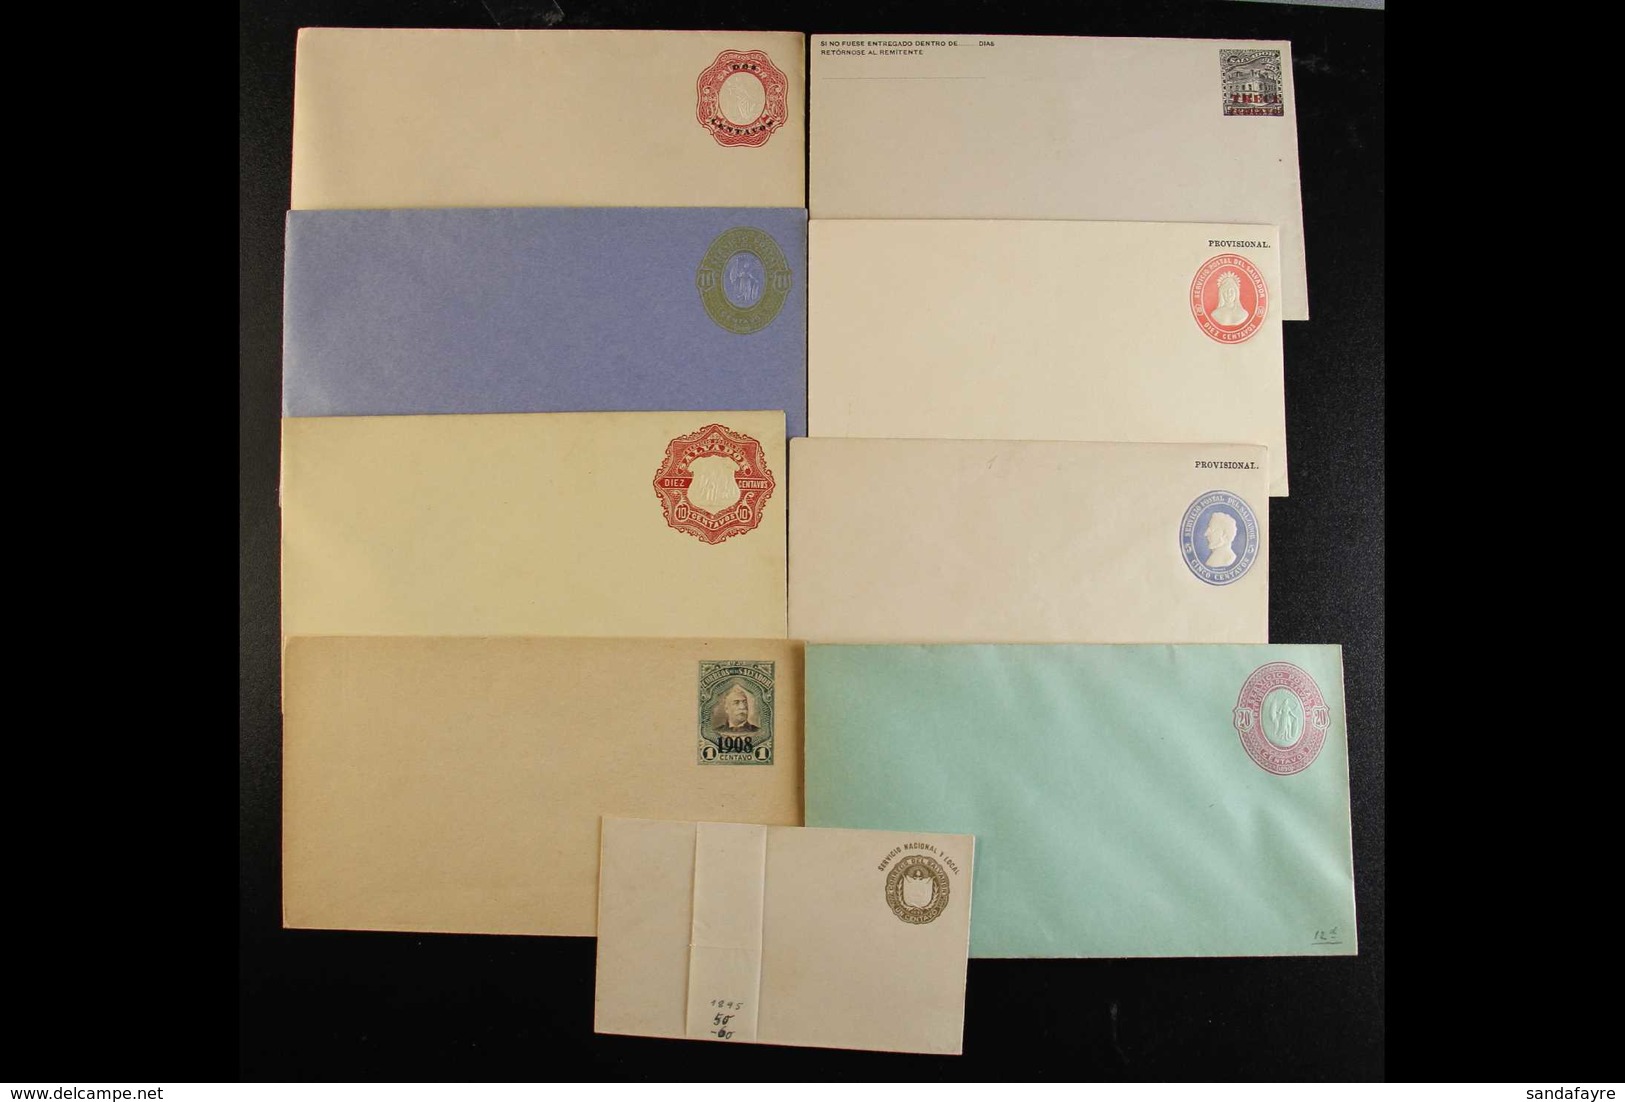 1887-1912 POSTAL STATIONERY Unused Range Of ENVELOPES With A Good Range Of Issued Types, Different Denominations And Siz - Salvador